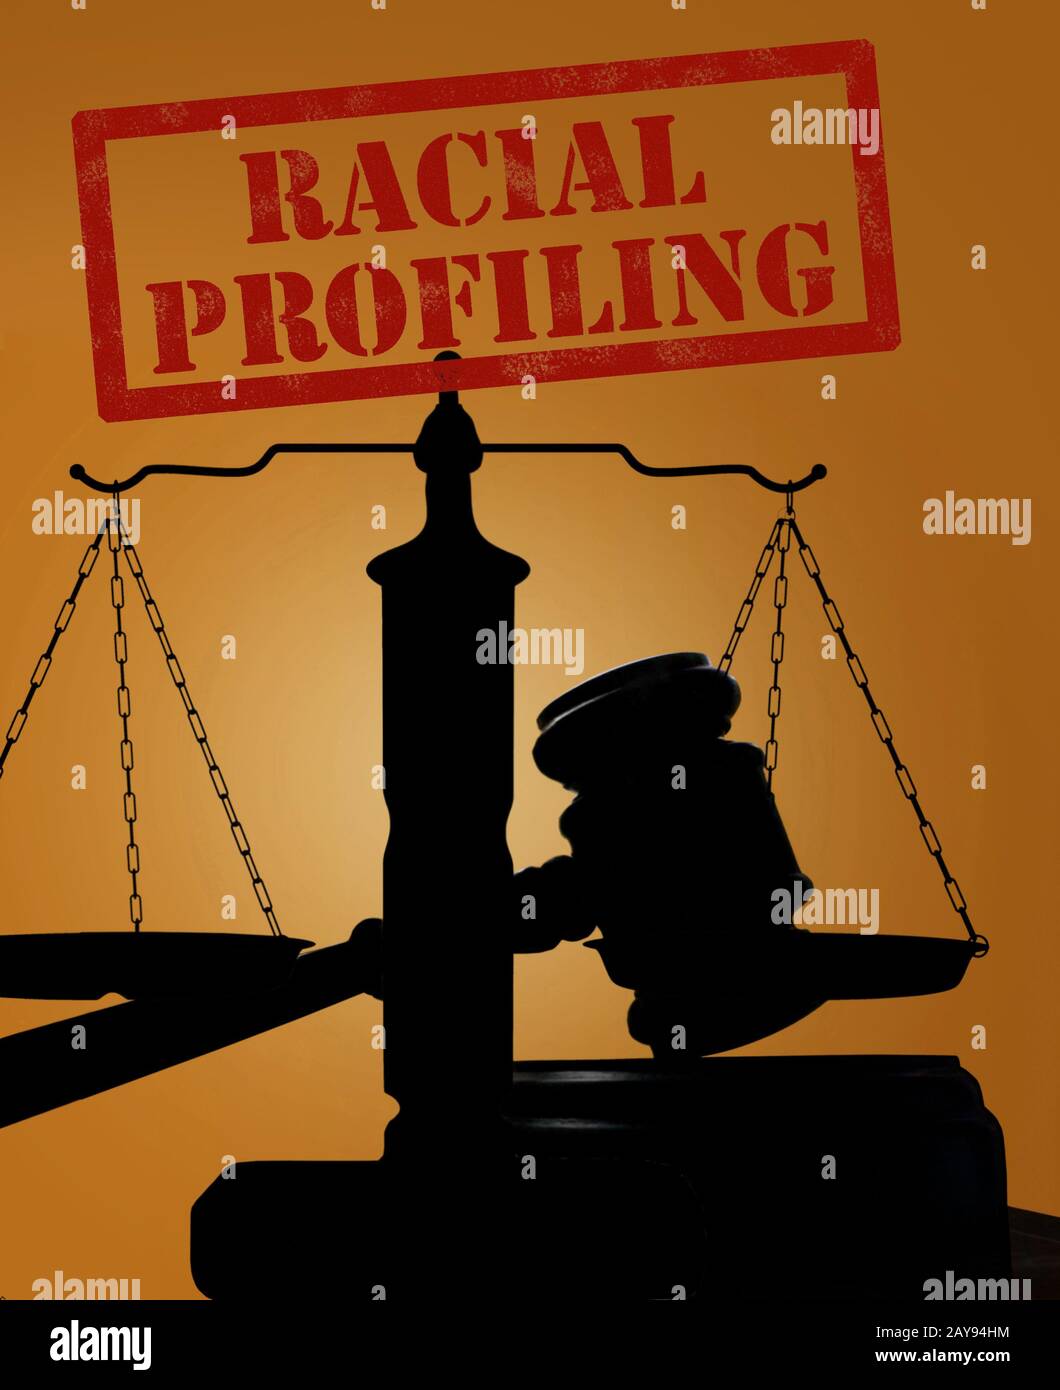 Racial Profiling text and gavel with scales Stock Photo